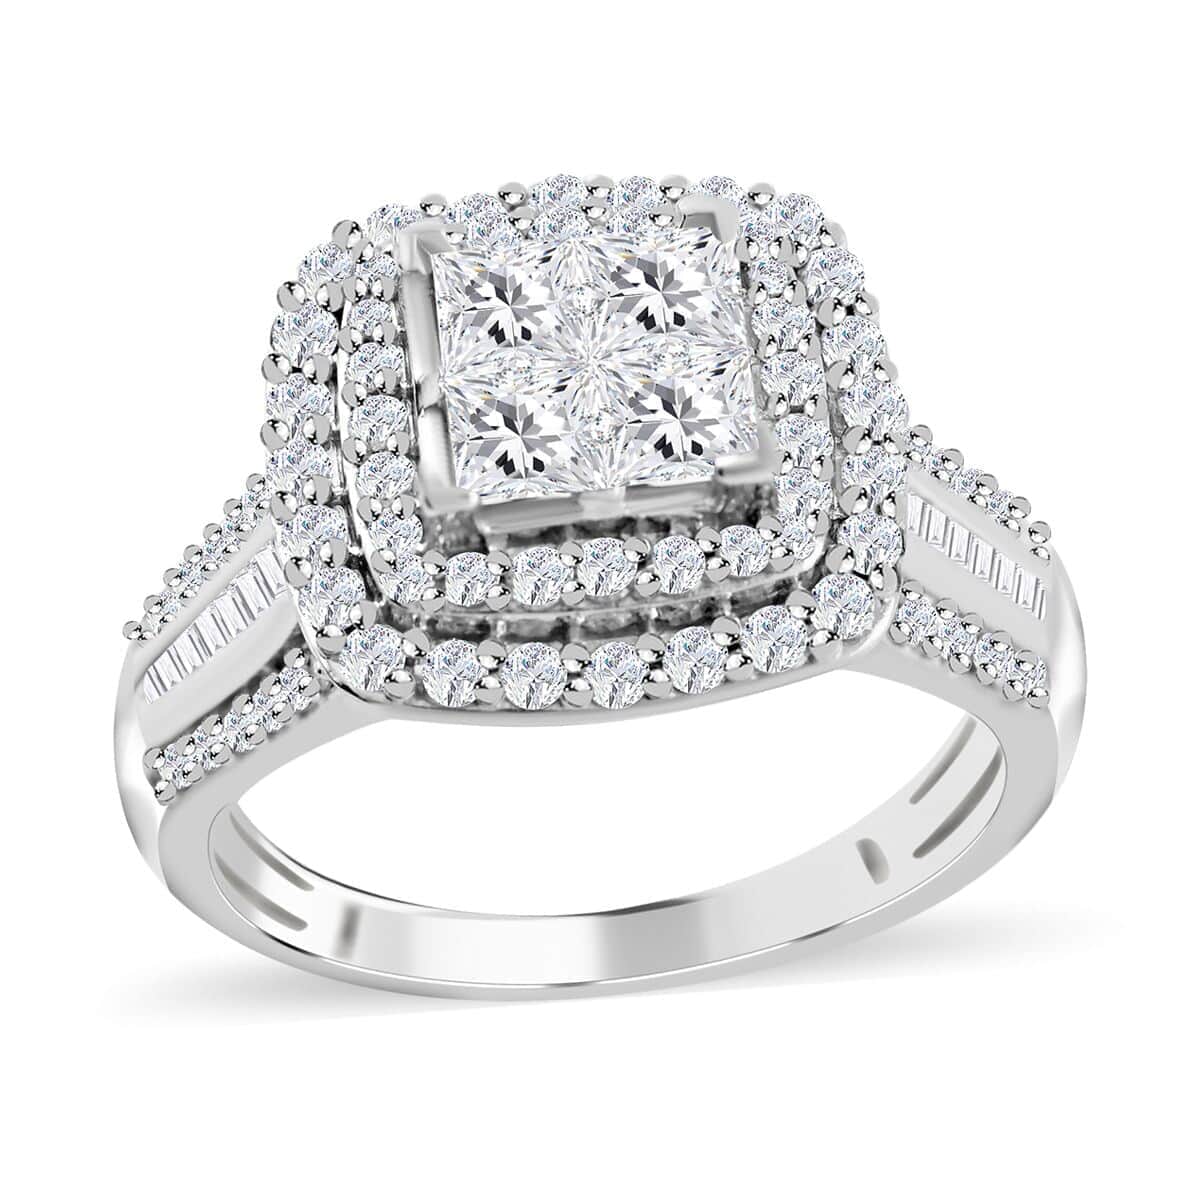 10K White Gold Diamond Ring 5.70 Grams 1.75 ctw (Delivery in 10-15 Business Days) image number 0